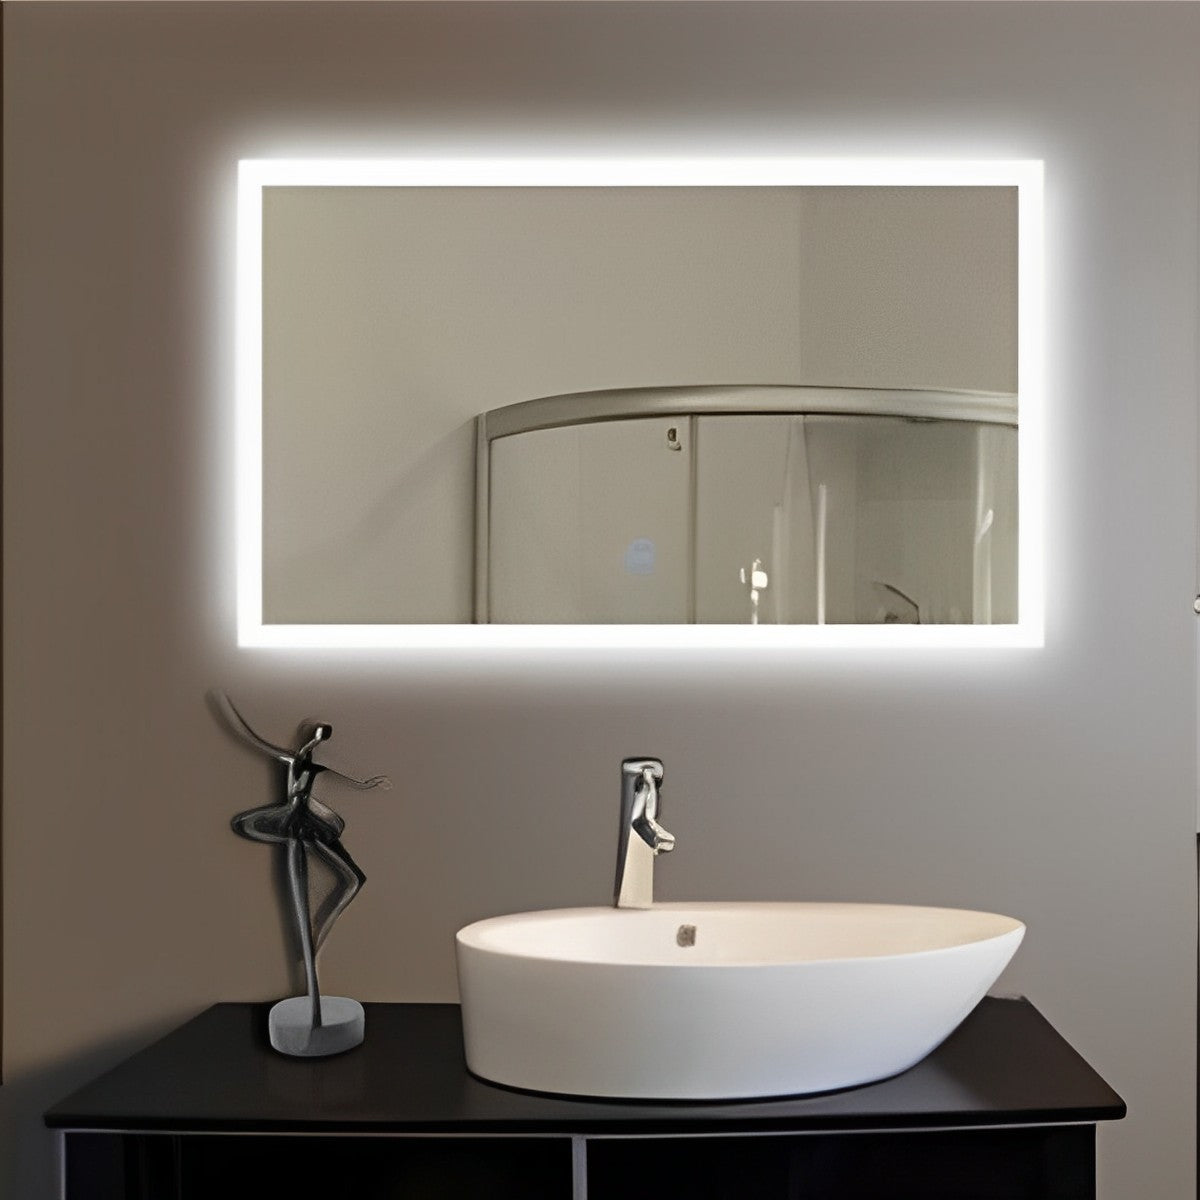 60" Horizontal Hanging Mirror with LED Light with Magnifying Function MSL-318 - RenoShop